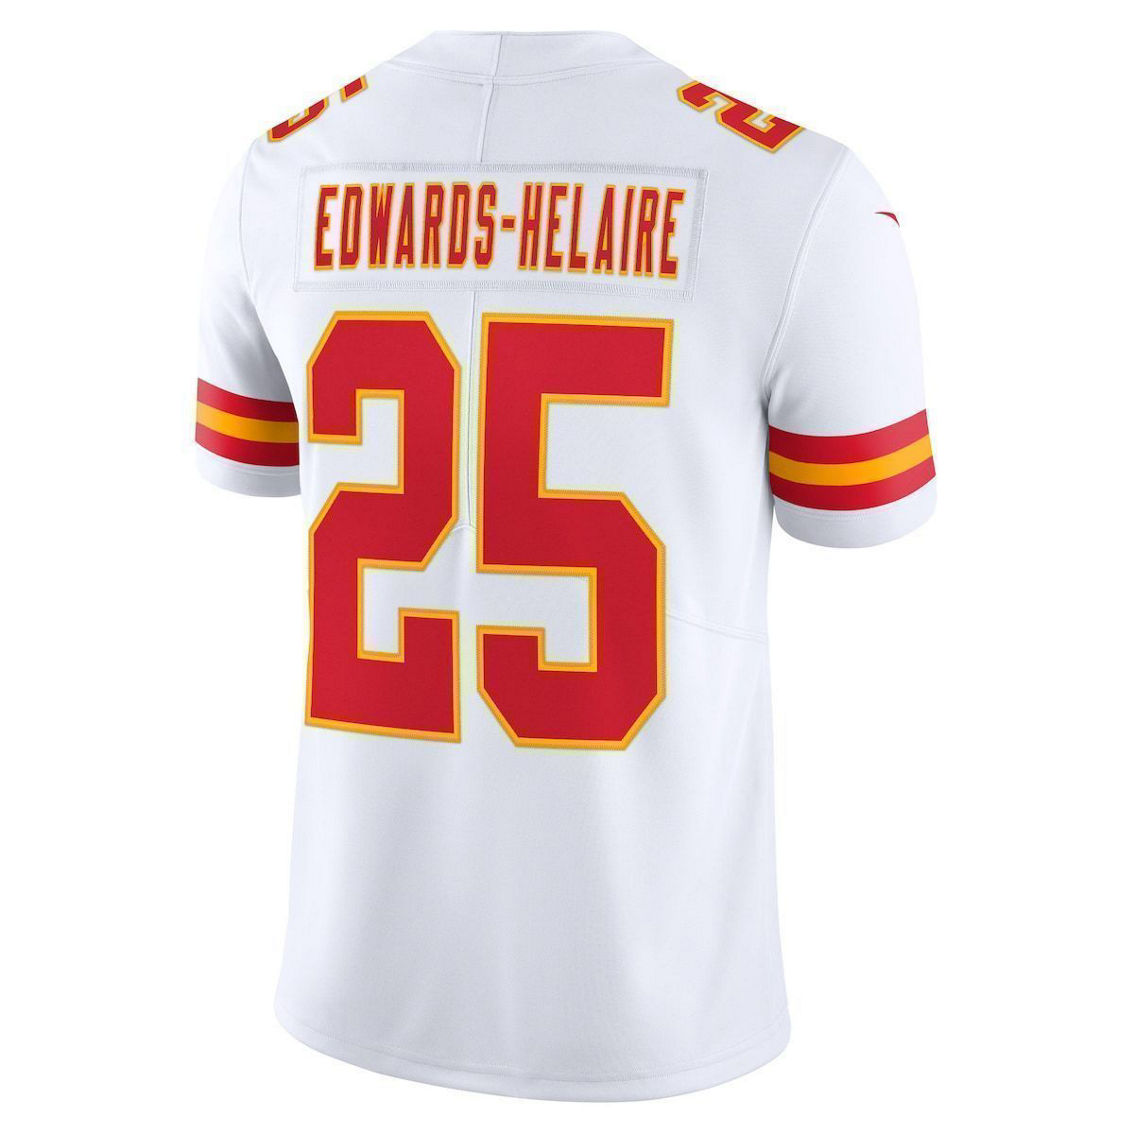 Nike Men's Clyde Edwards-Helaire White Kansas City Chiefs Vapor Limited Jersey - Image 4 of 4